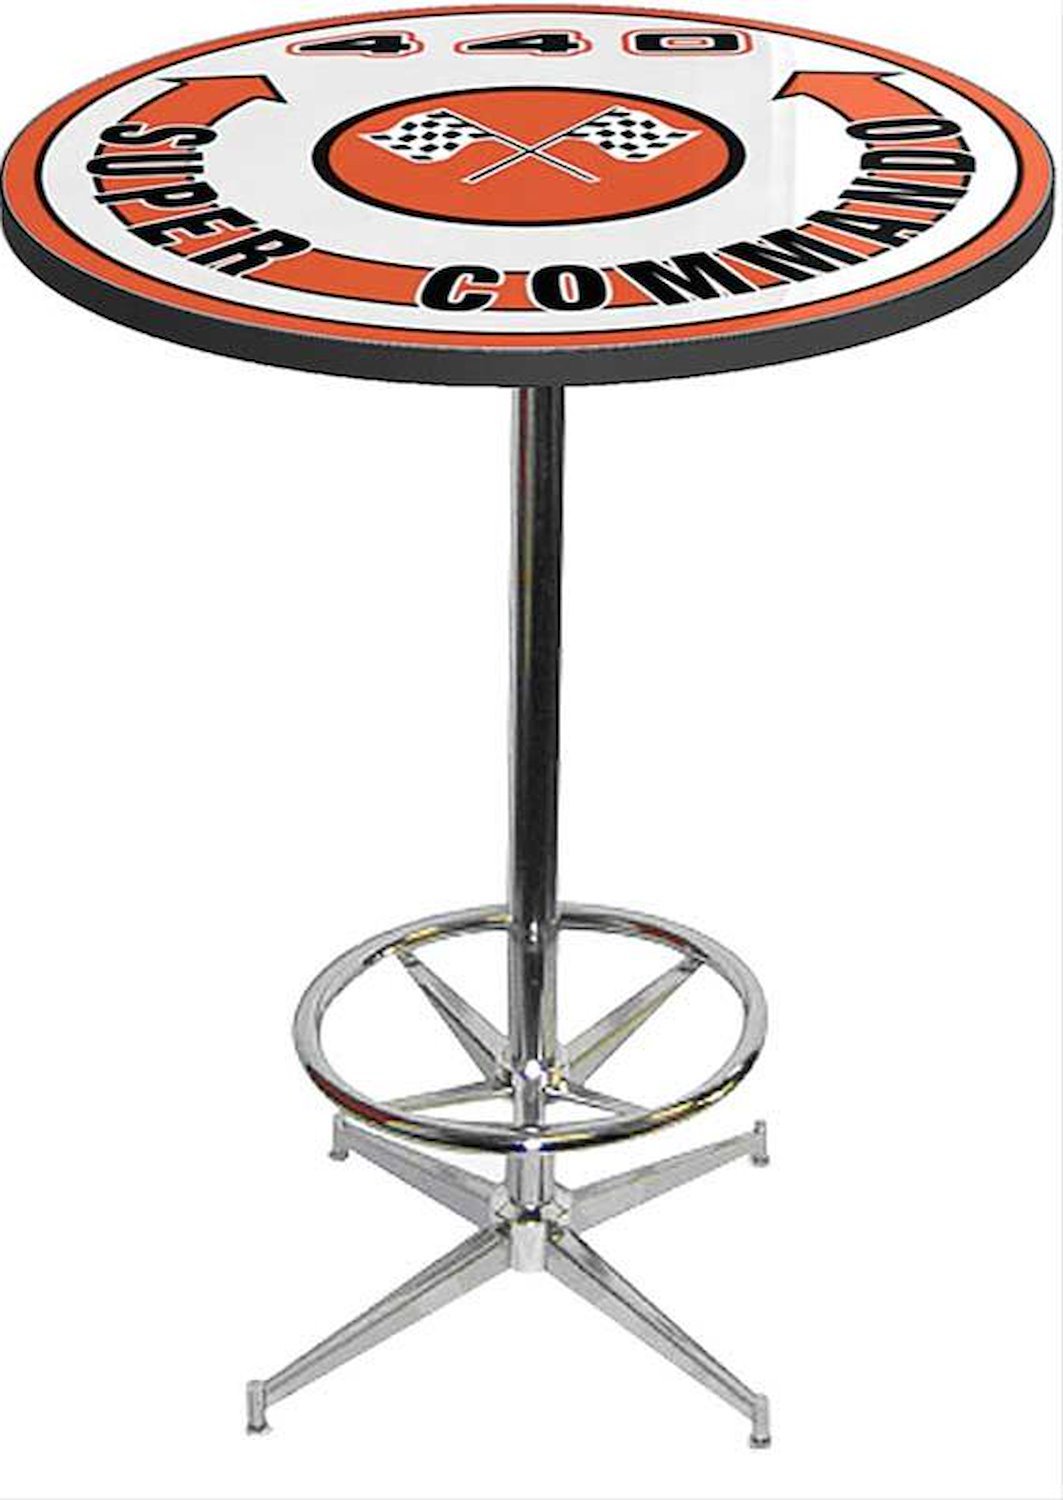 MD673109 Pub Table With Chrome Base And Foot Rest Mopar 440 Super CommAndo Logo Pub Table With Chrome Base And Foot Rest